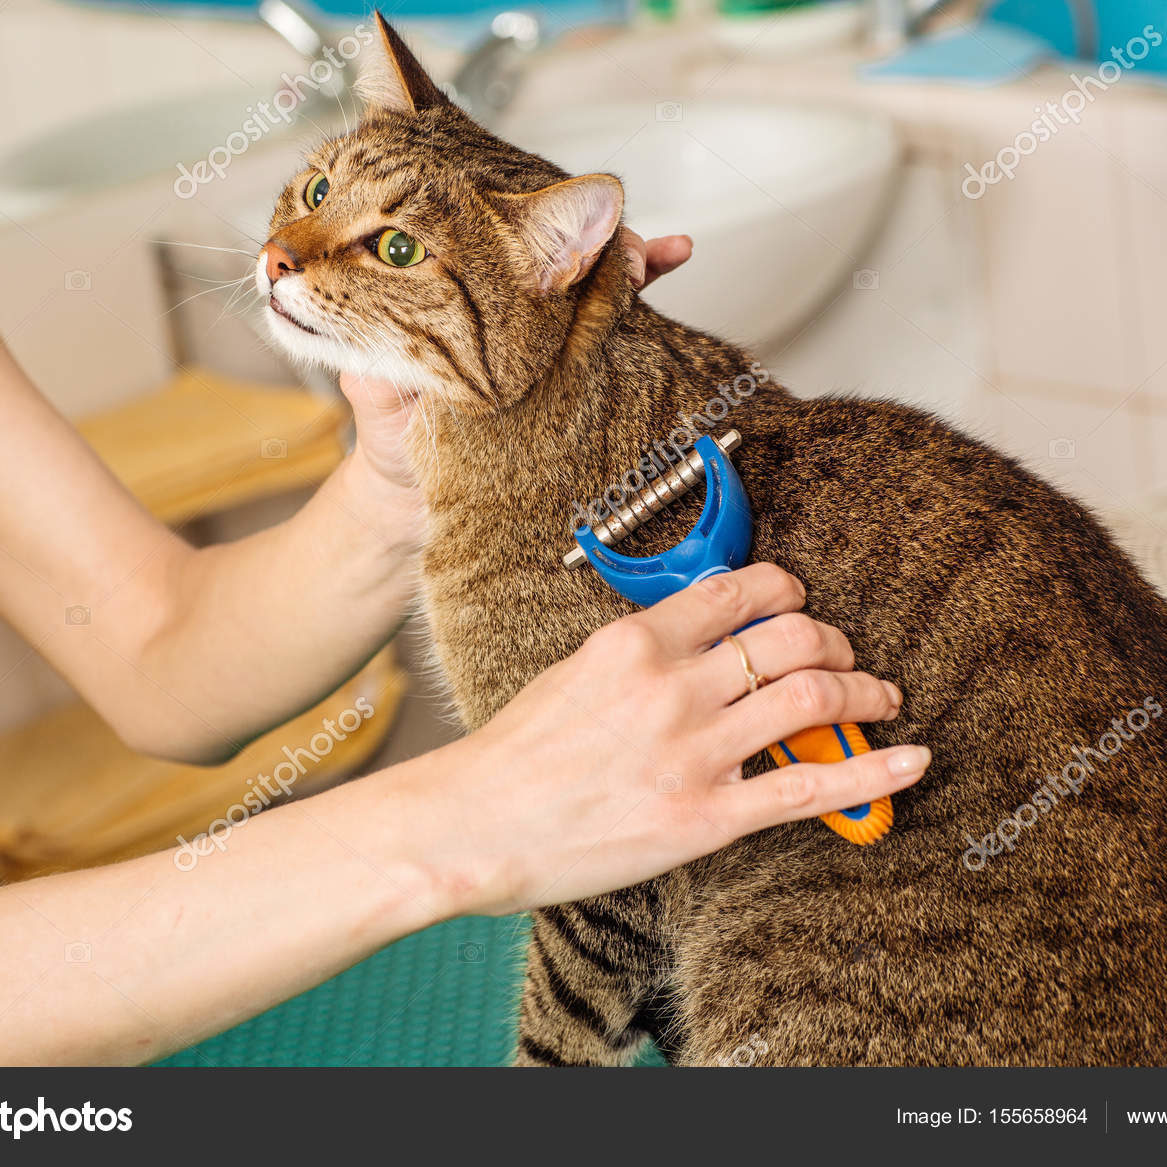 Grooming cat with tool for shedding hair. medicine, pet, animals, health care and people concept